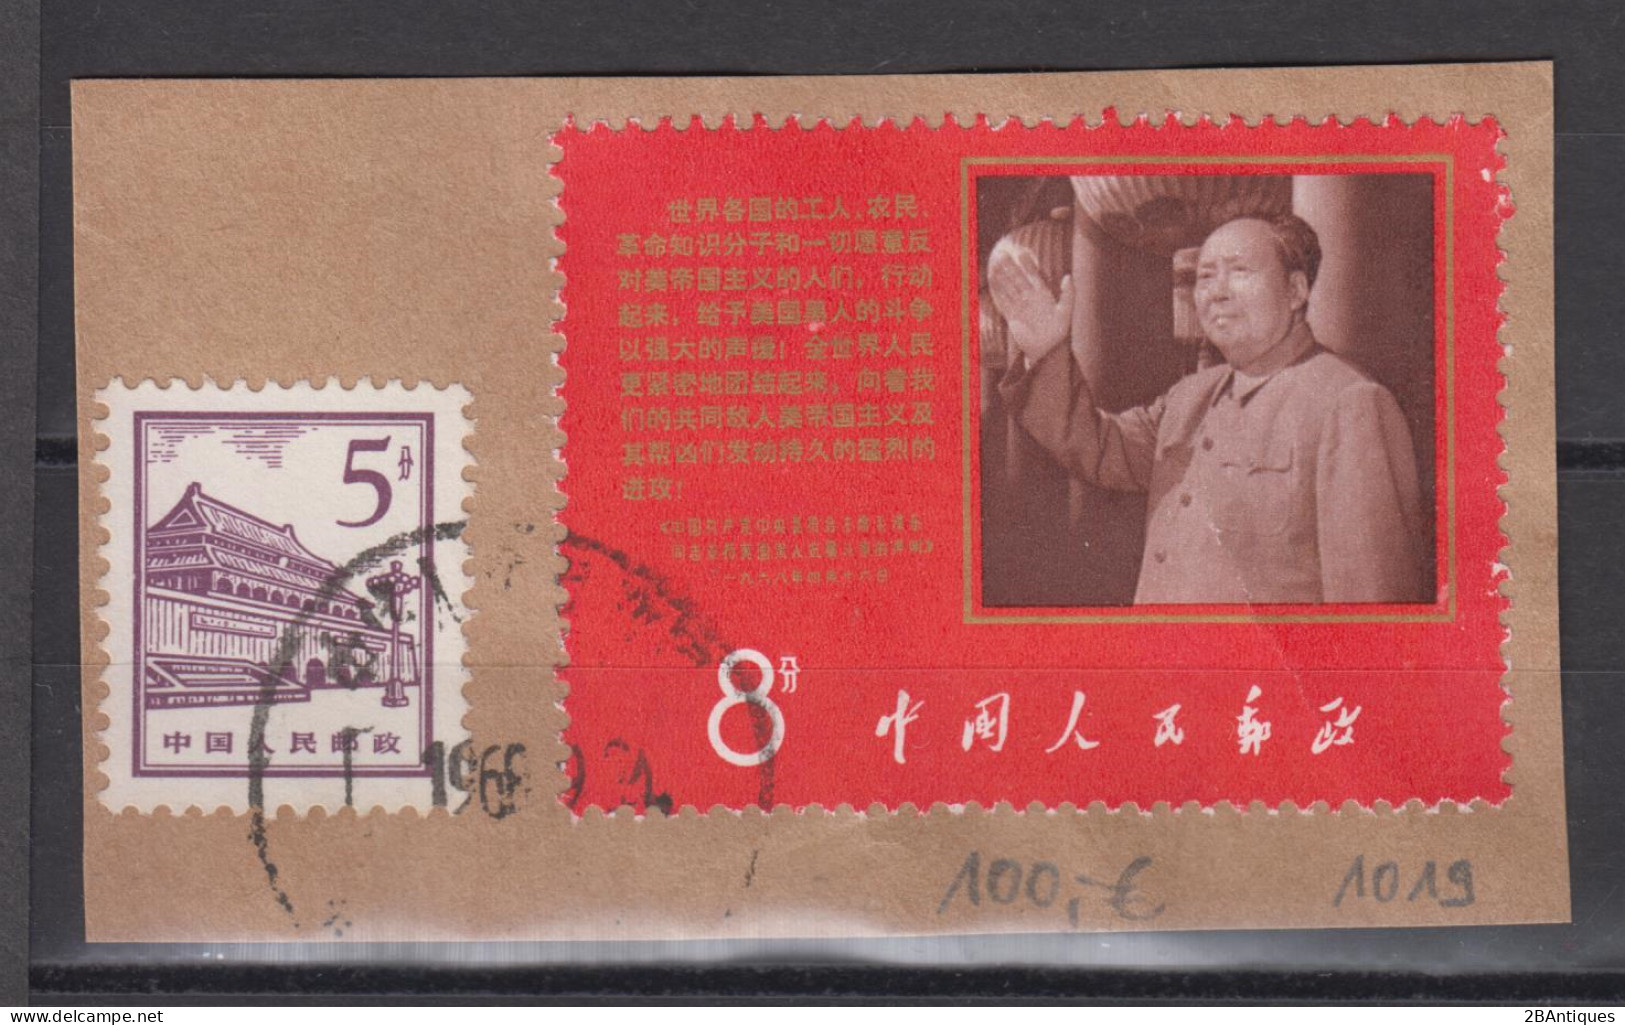 PR CHINA 1968 - Mao's Anti-American Declaration Used On Paper - Used Stamps